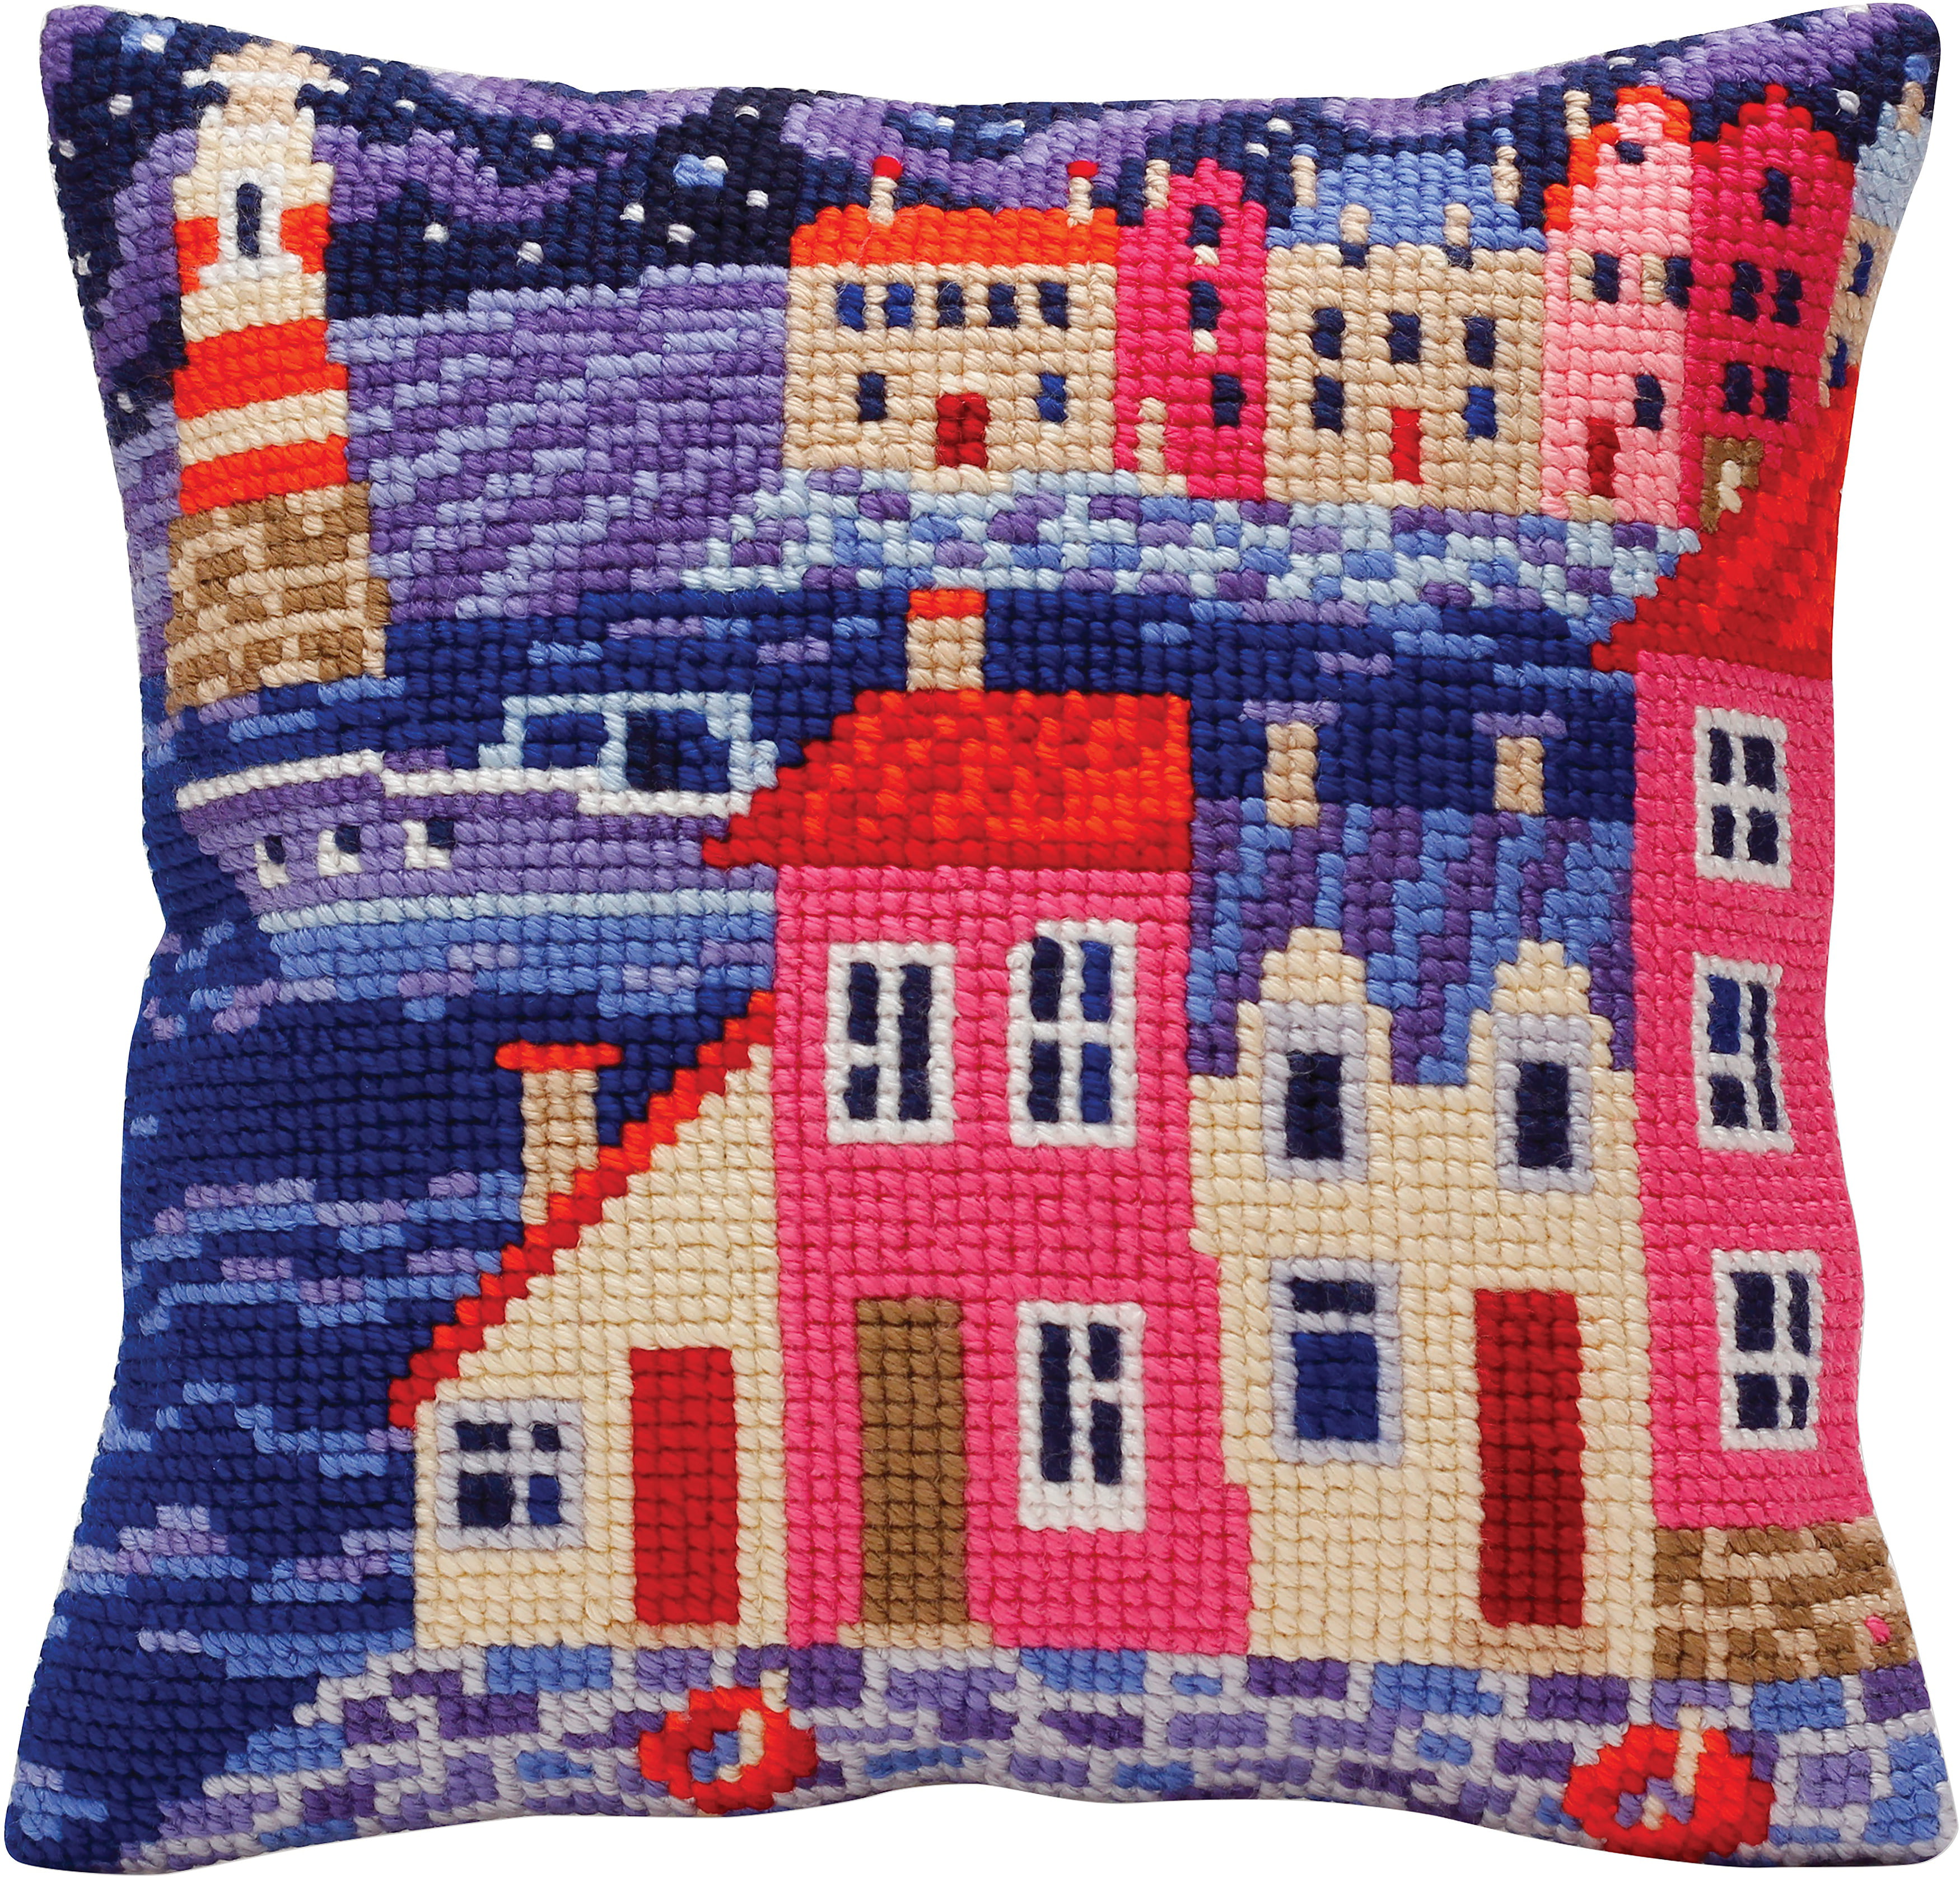 Collection D'Art Stamped Needlepoint Cushion Kit 40X40cm-Night Harbor 2 ...